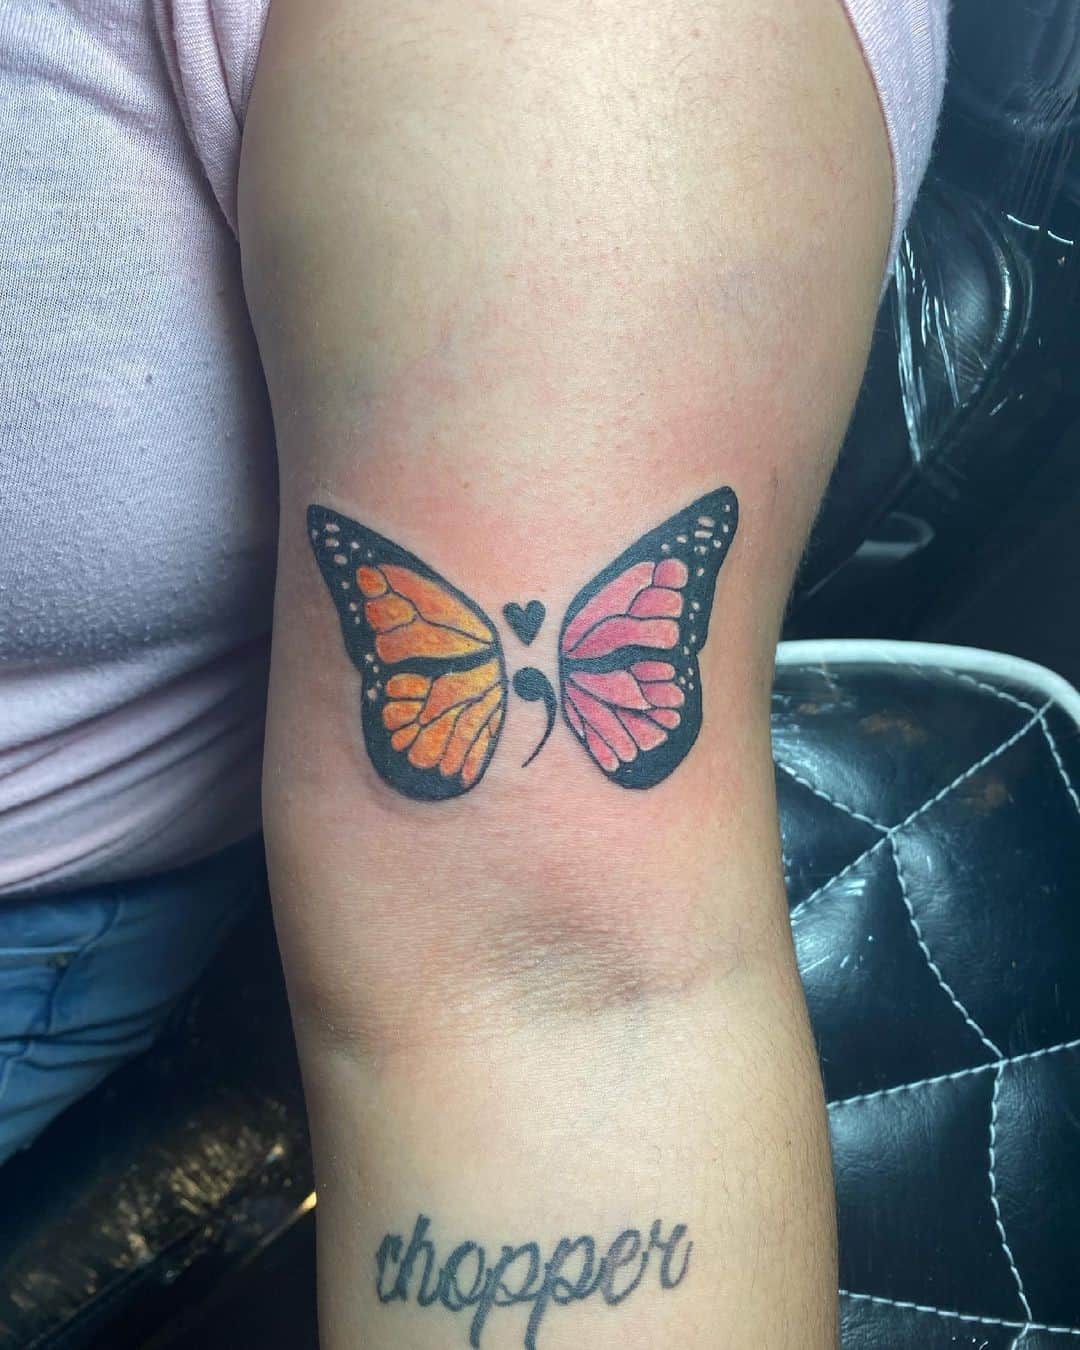 Semicolon Butterfly Tattoo Meaning: A Symbol of Resilience and Transformation